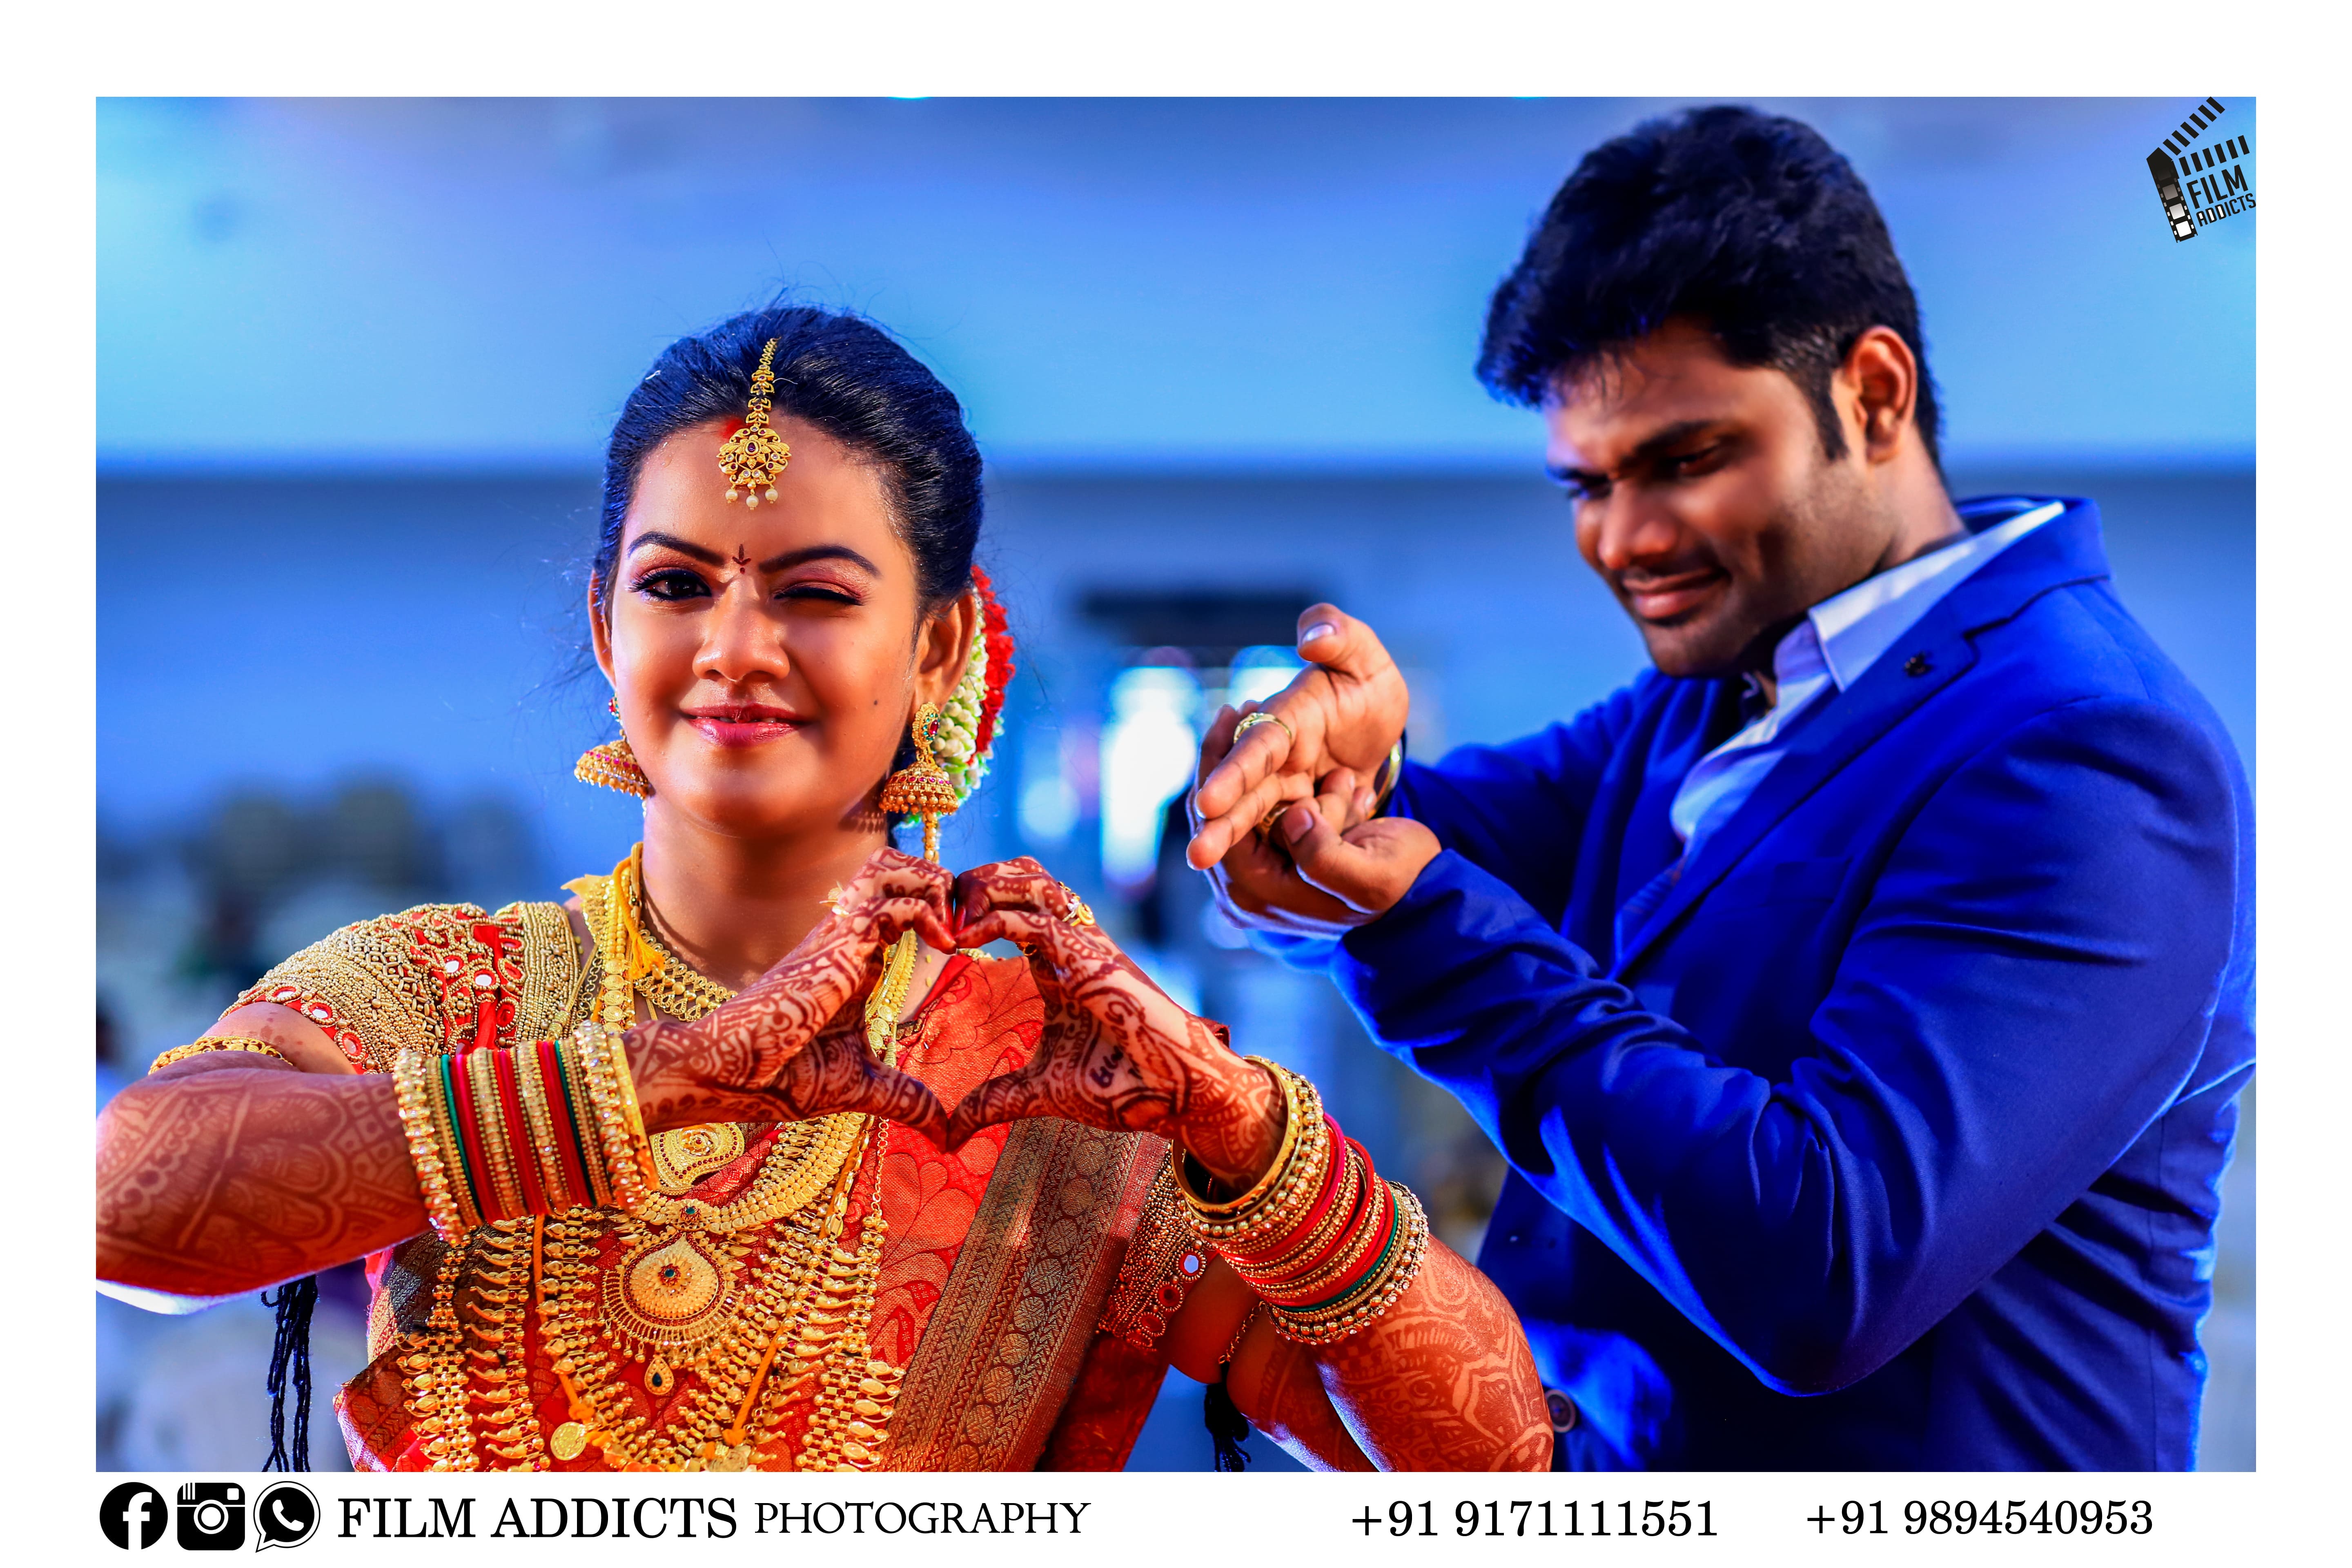 Best candid wedding photographers in Theni,Best Photography Theni, Wedding Photography Theni, Best Photographers In Theni, Professional Wedding Photographers In Theni, Marriage Photography In Theni, Candid Photography In Theni, Best Candid Photographers In Theni